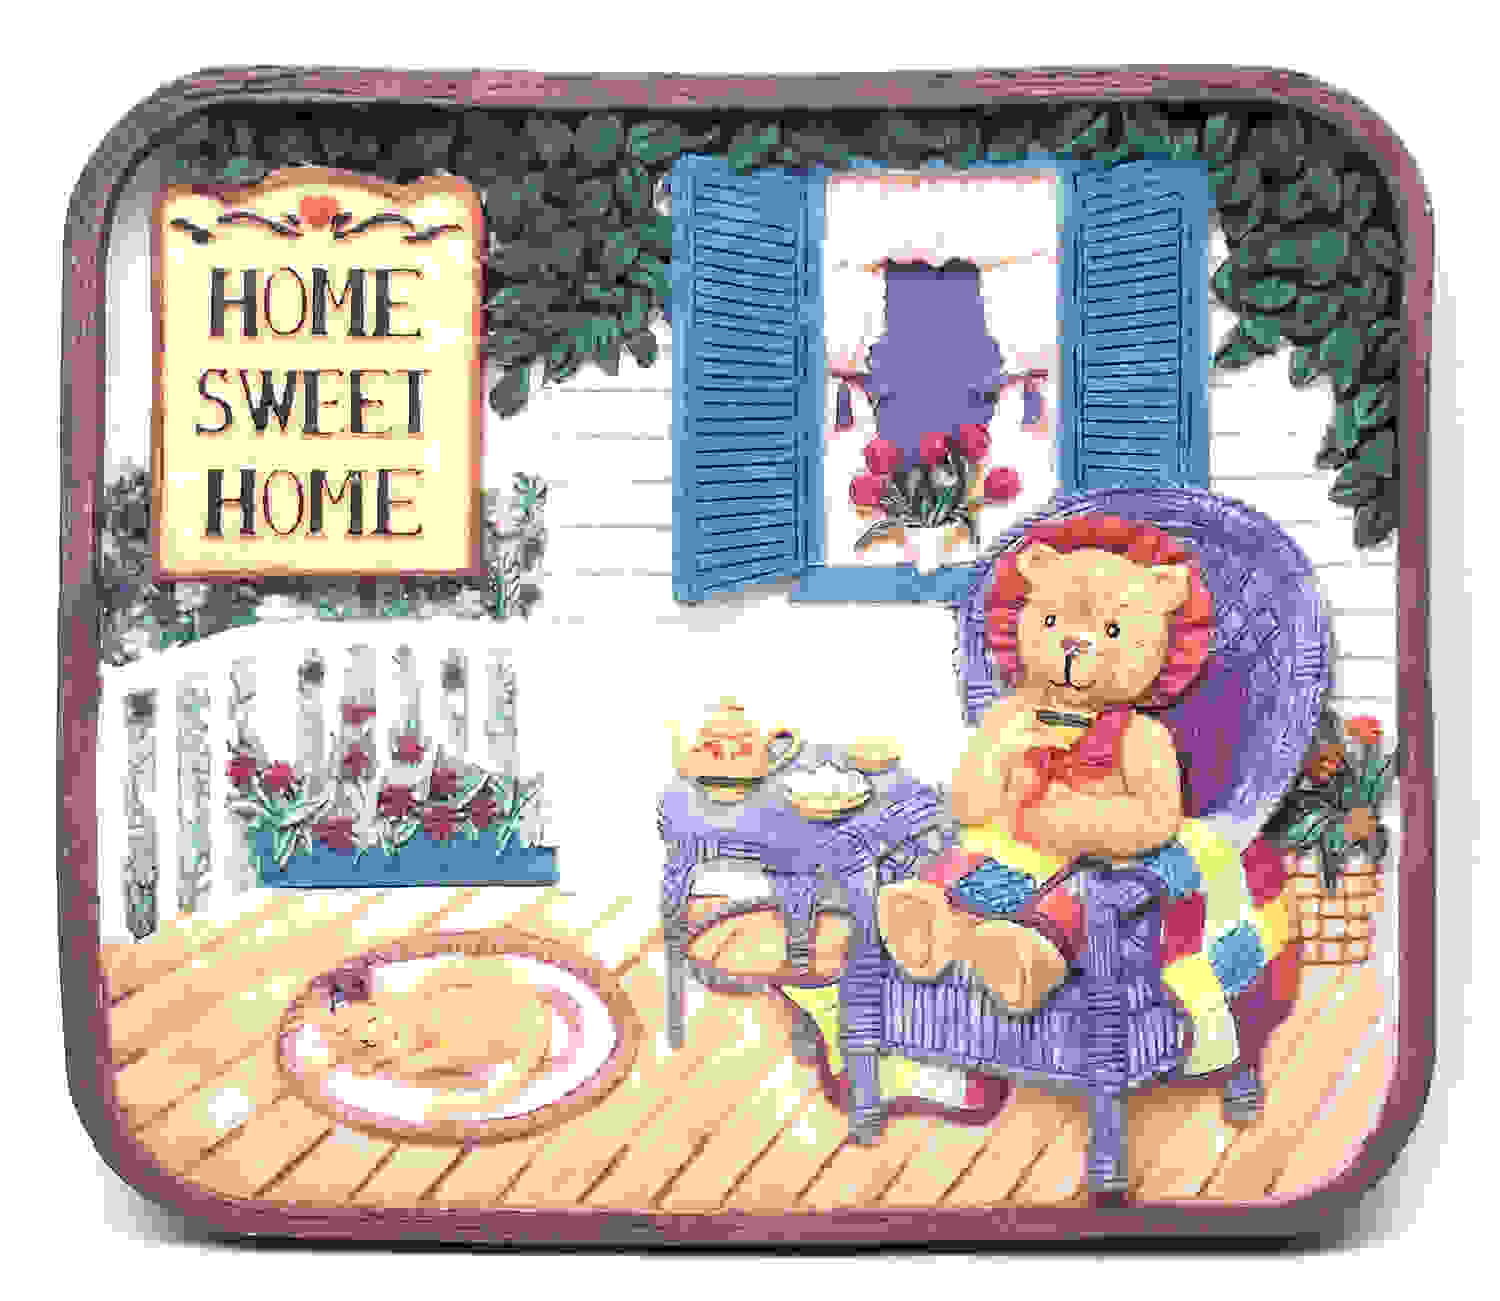 Home Sweet Home Resin Wall Plaque - Bear On Porch At Tea Time